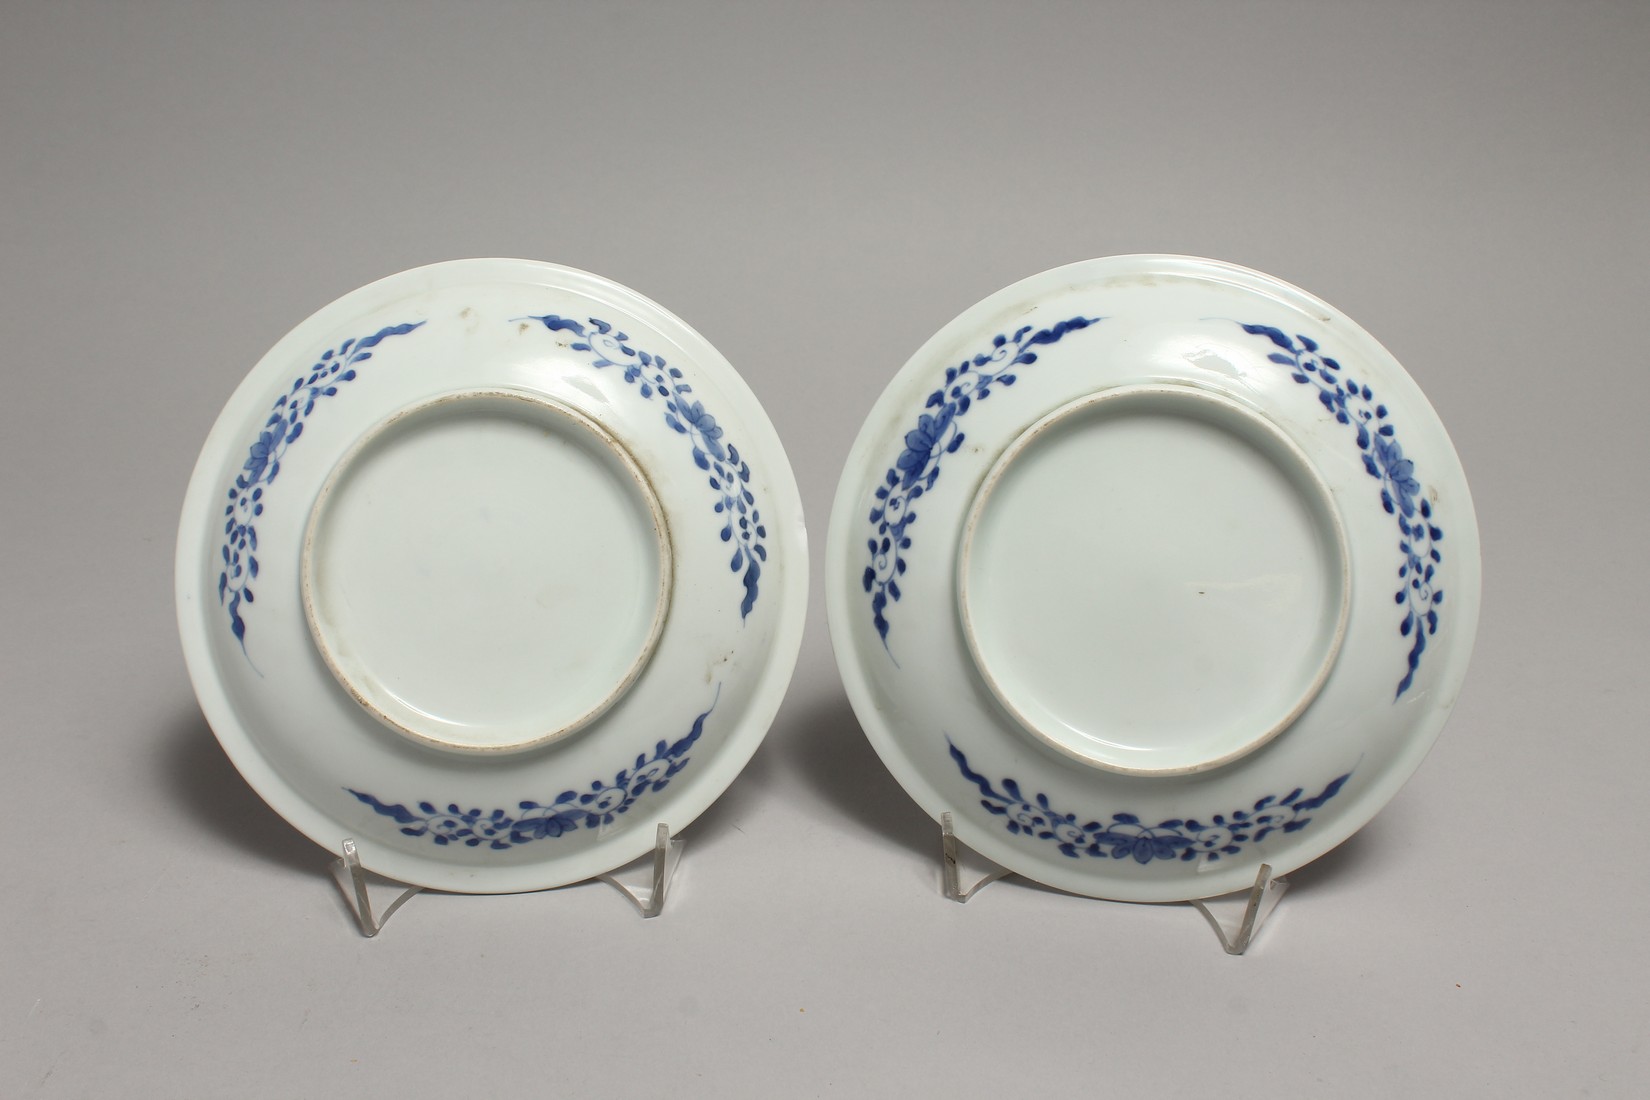 A PAIR OF BLUE AND WHITE PLATES decorated with storks. 7ins diamter. - Image 2 of 2